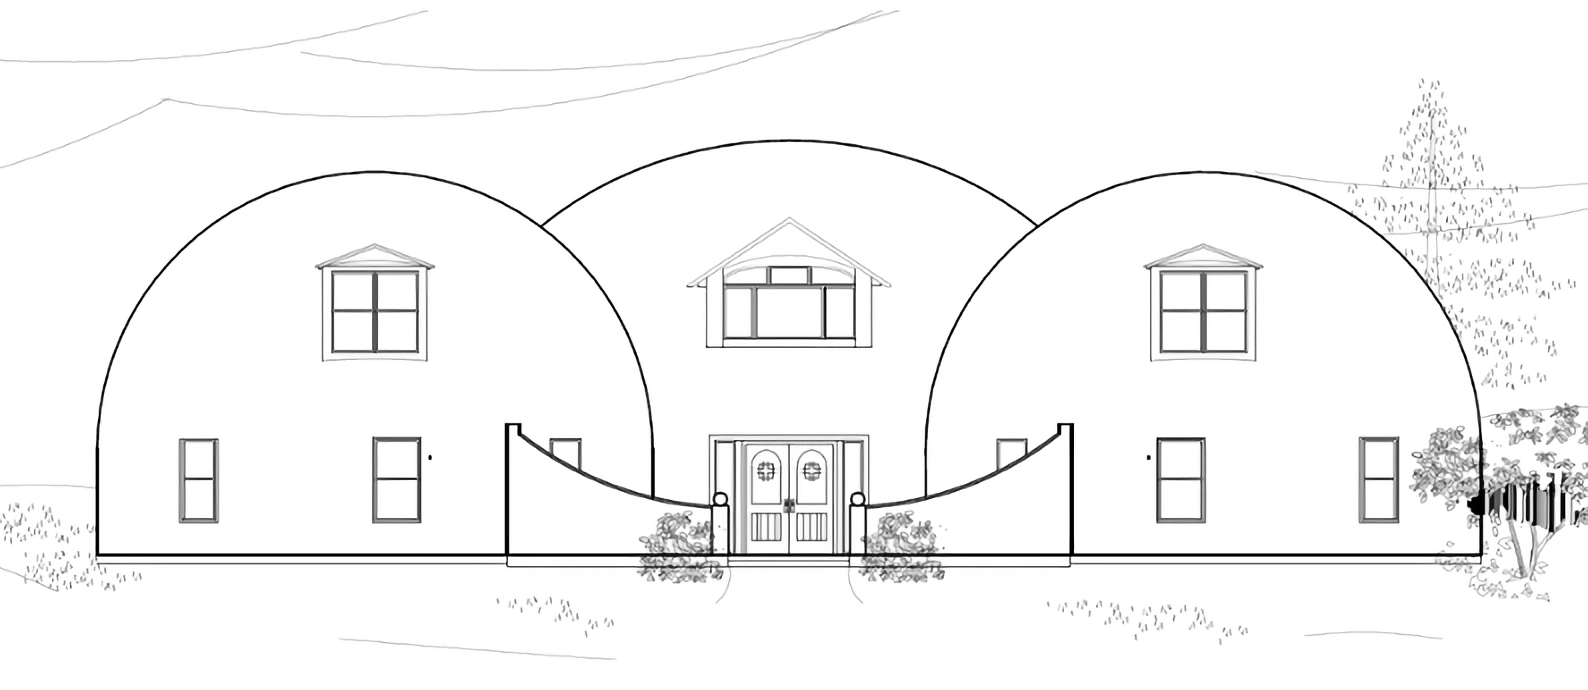 Elevation drawing of the Whiteacre dome home.